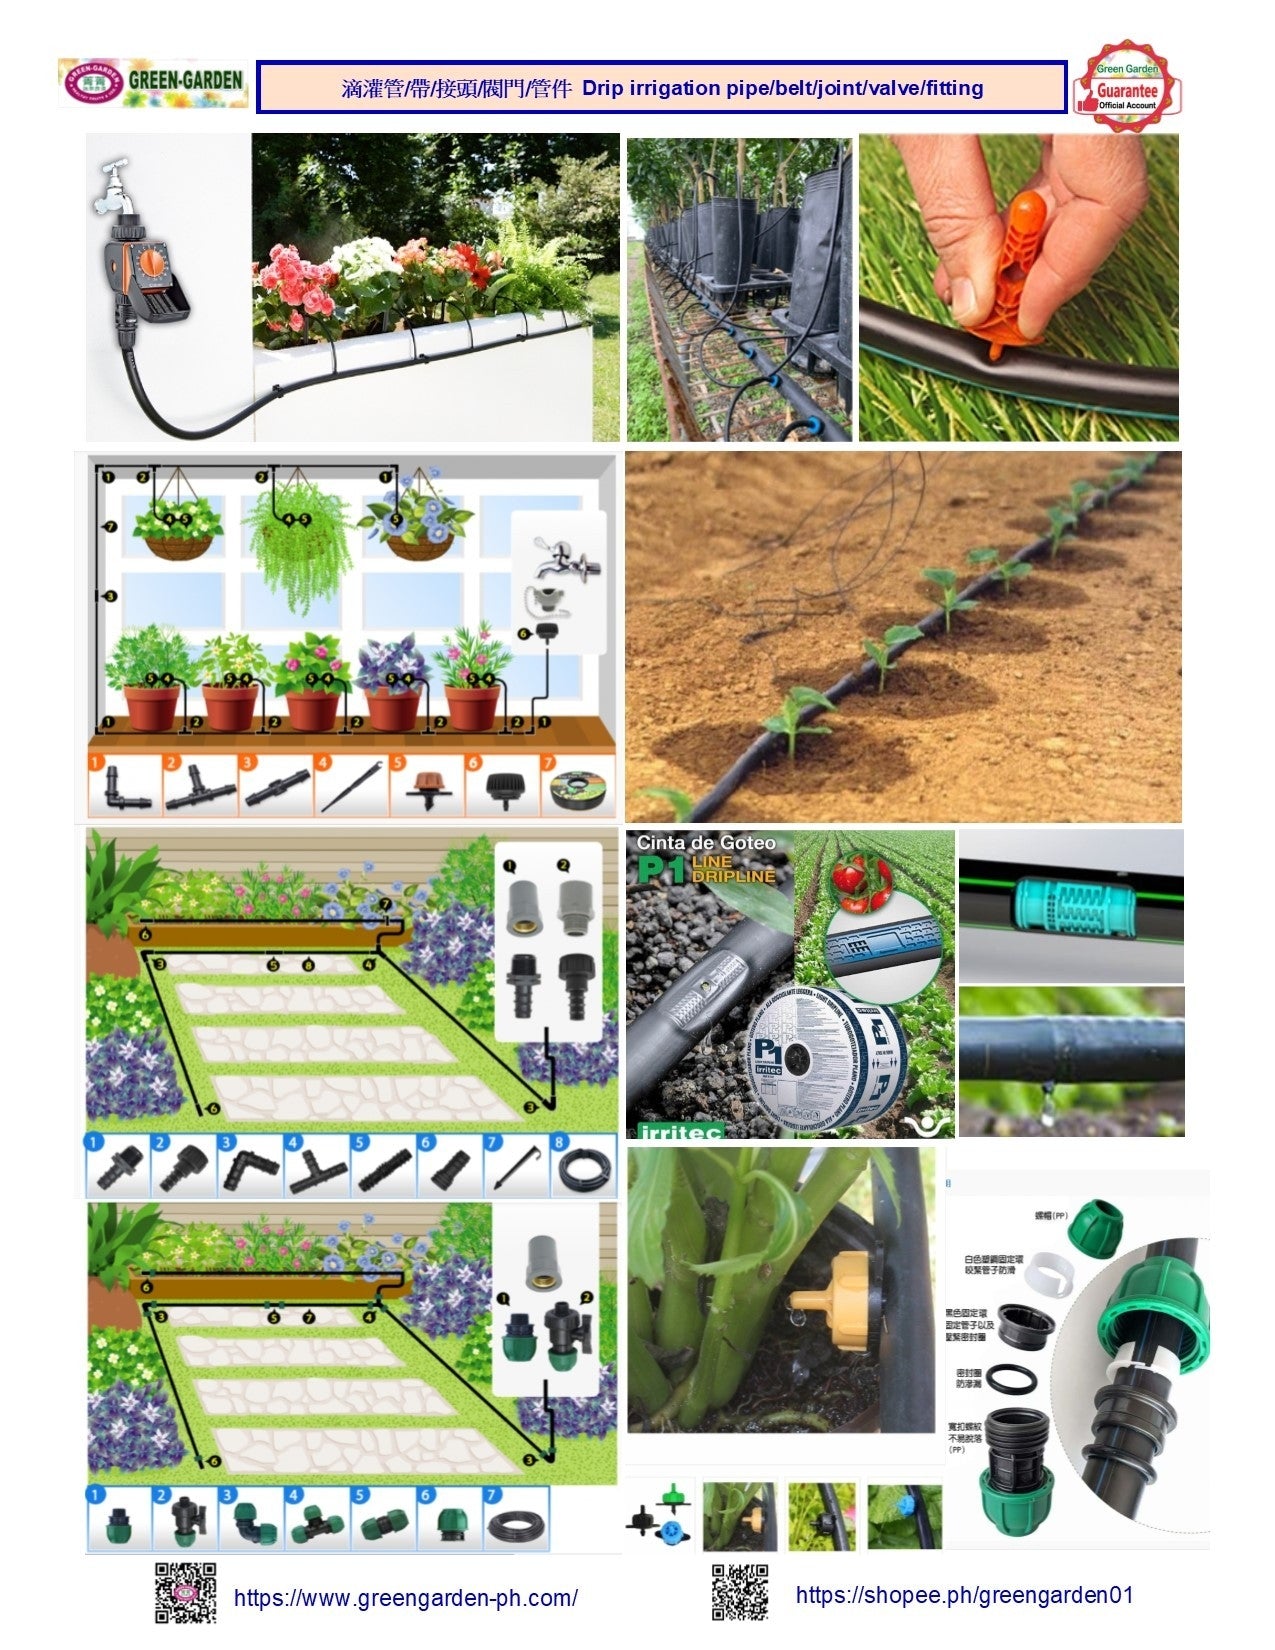 Drip Irrigation System - 16mm x 20mm three-section different diameter direct connector (2pcs) BG17